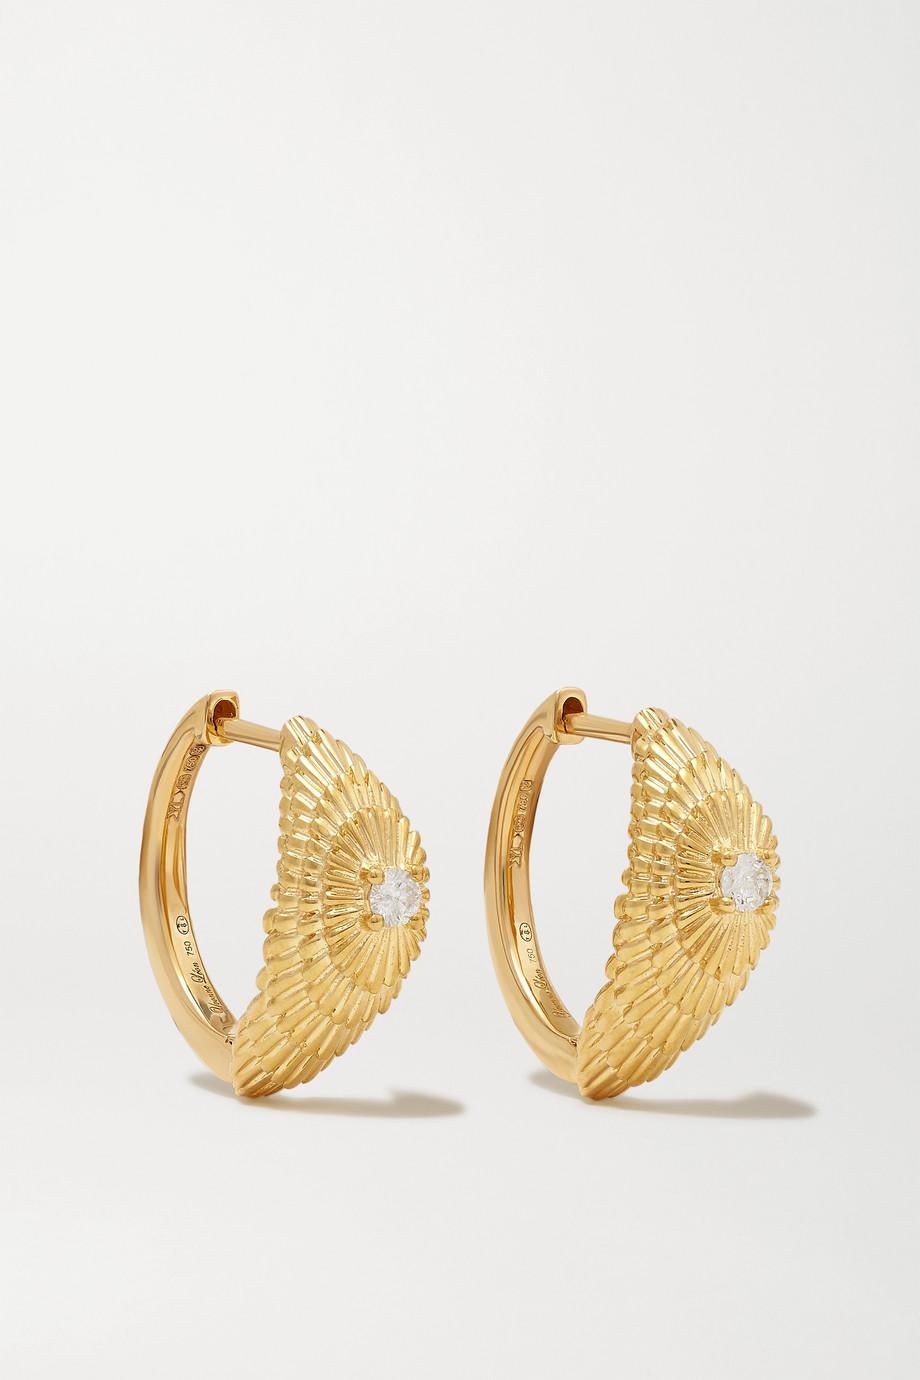 Yvonne Leon's Sea Urchin Pair of Hoops in 18 Karat Yellow Gold and Diamond In New Condition For Sale In Paris, FR